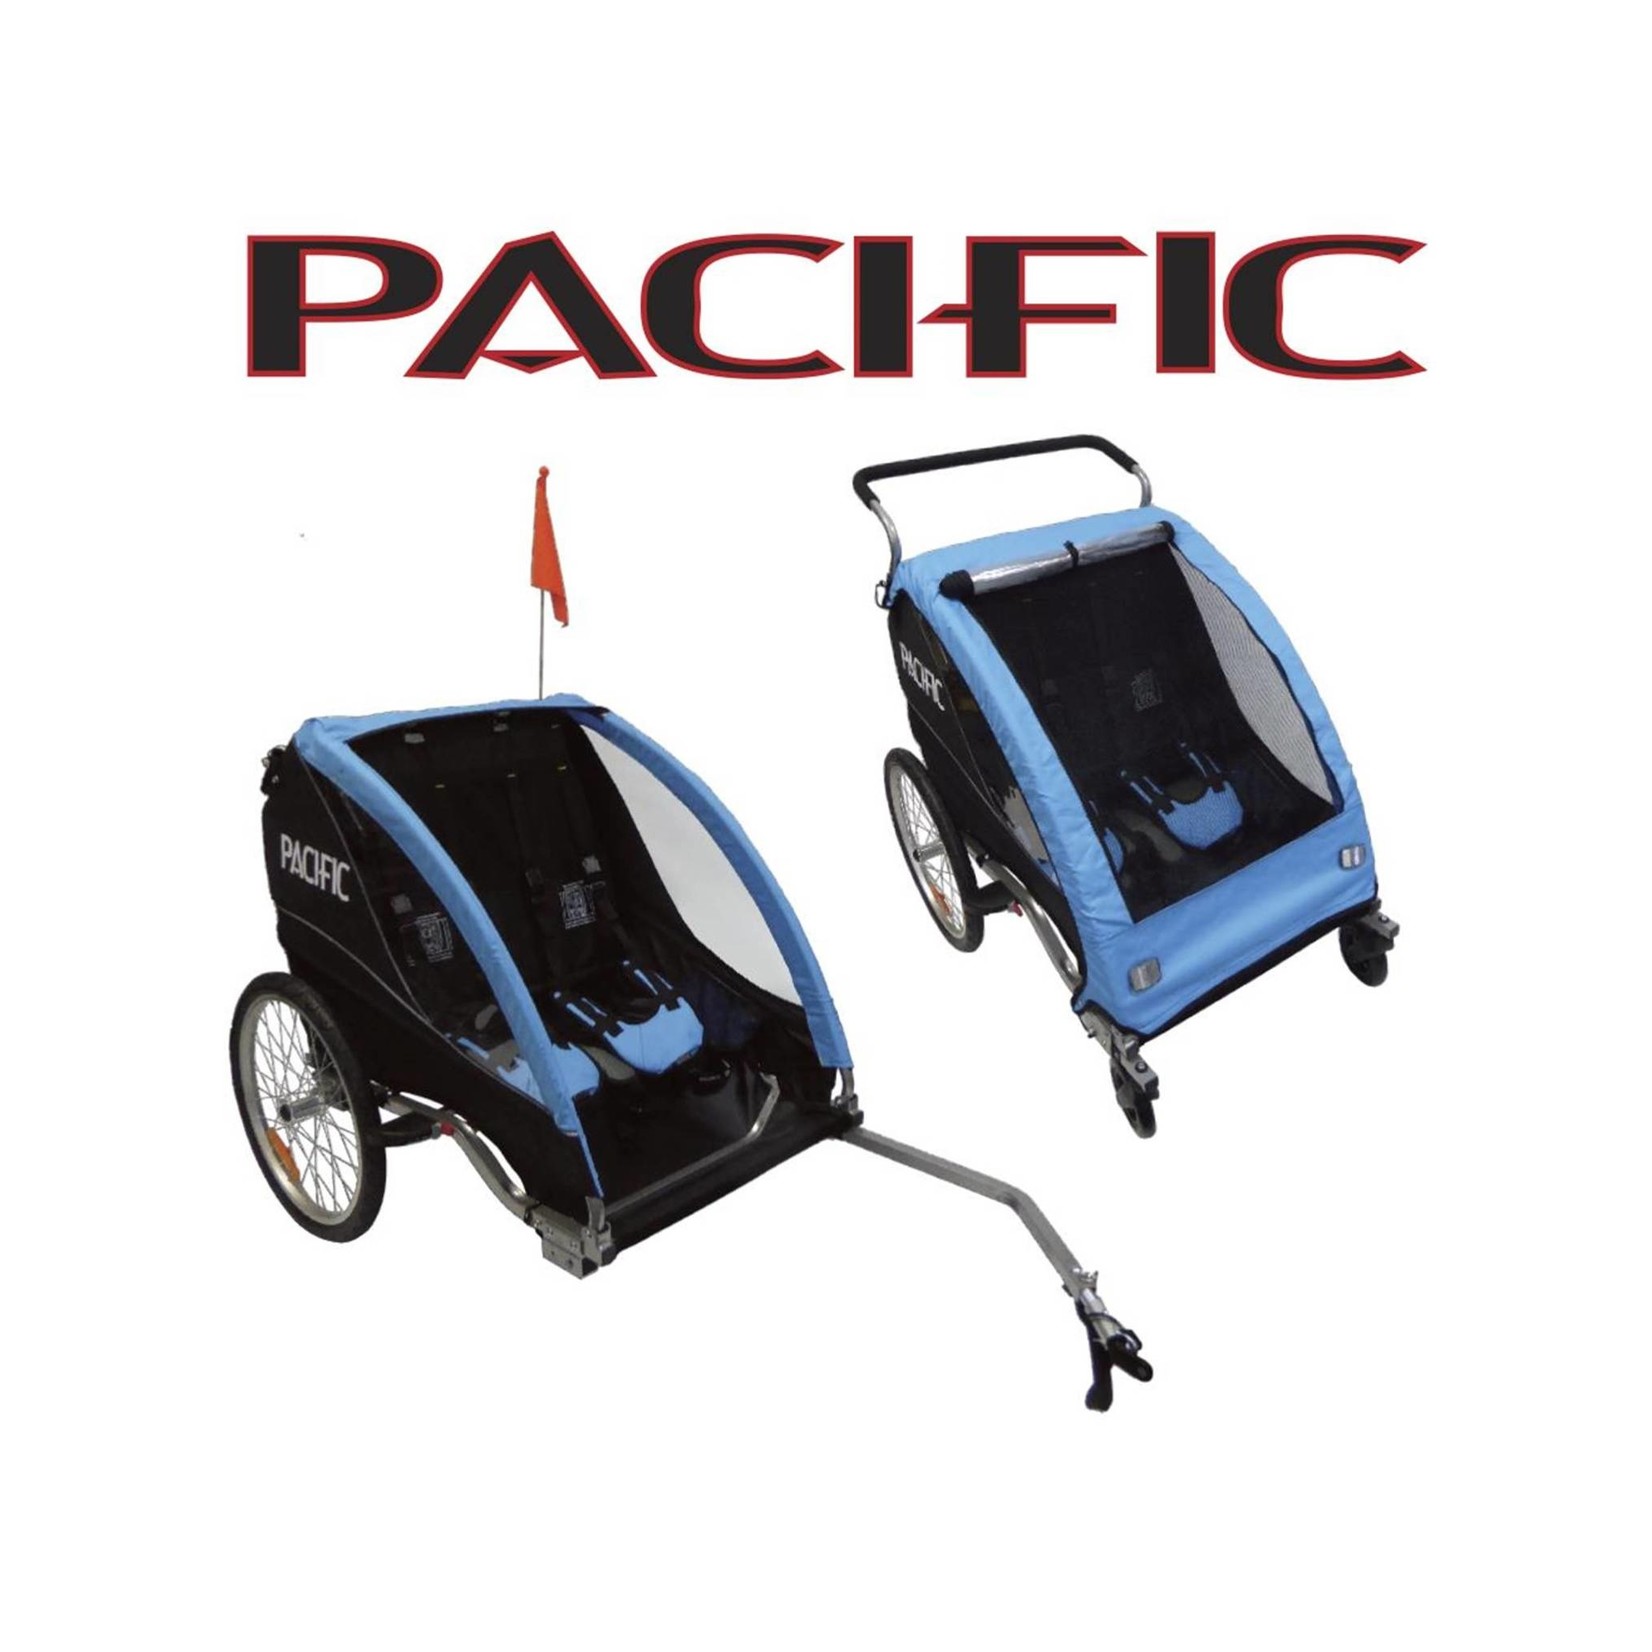 Pacific Deluxe Alloy 2 In 1 Trailer/Stroller - 2 Child